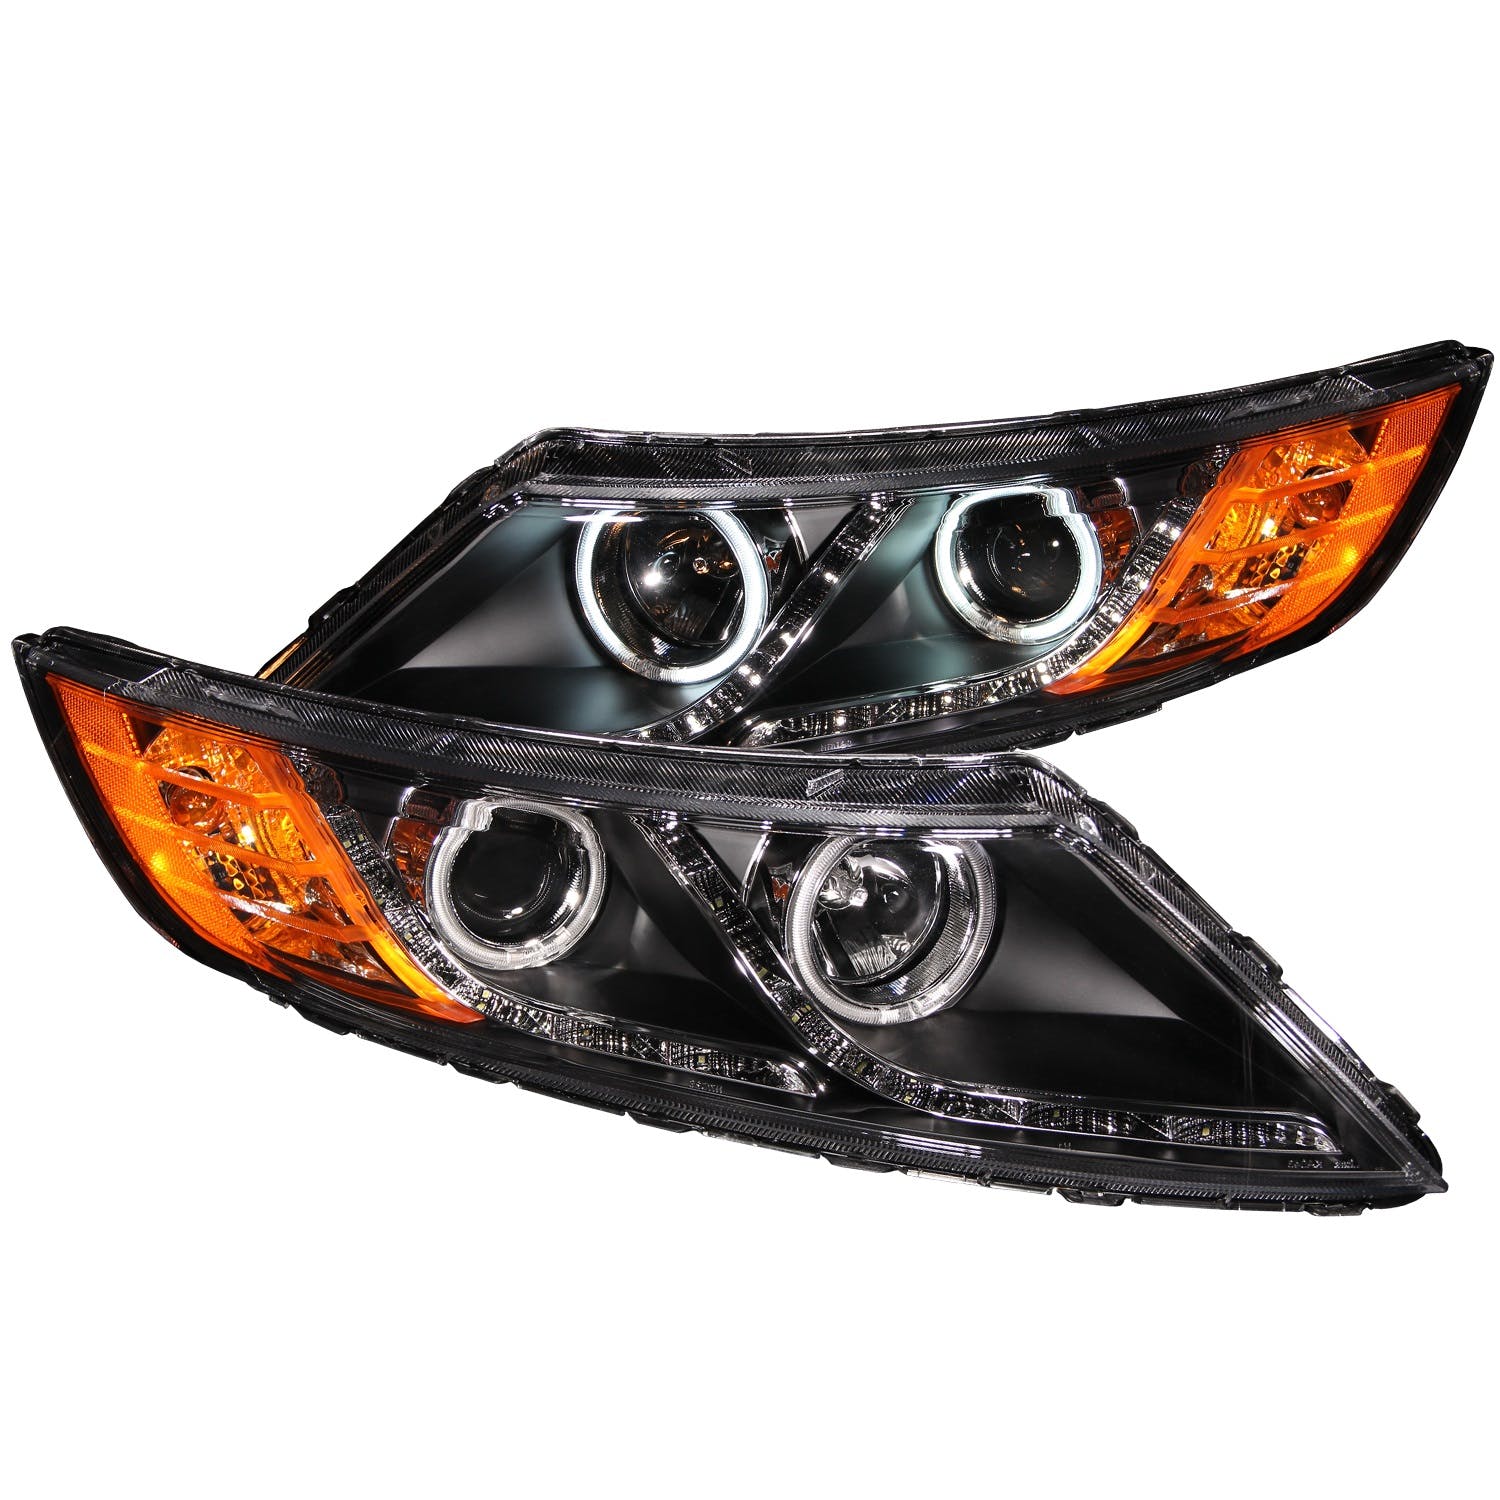 AnzoUSA 121460 Projector Headlights with Halo Black (SMD LED)